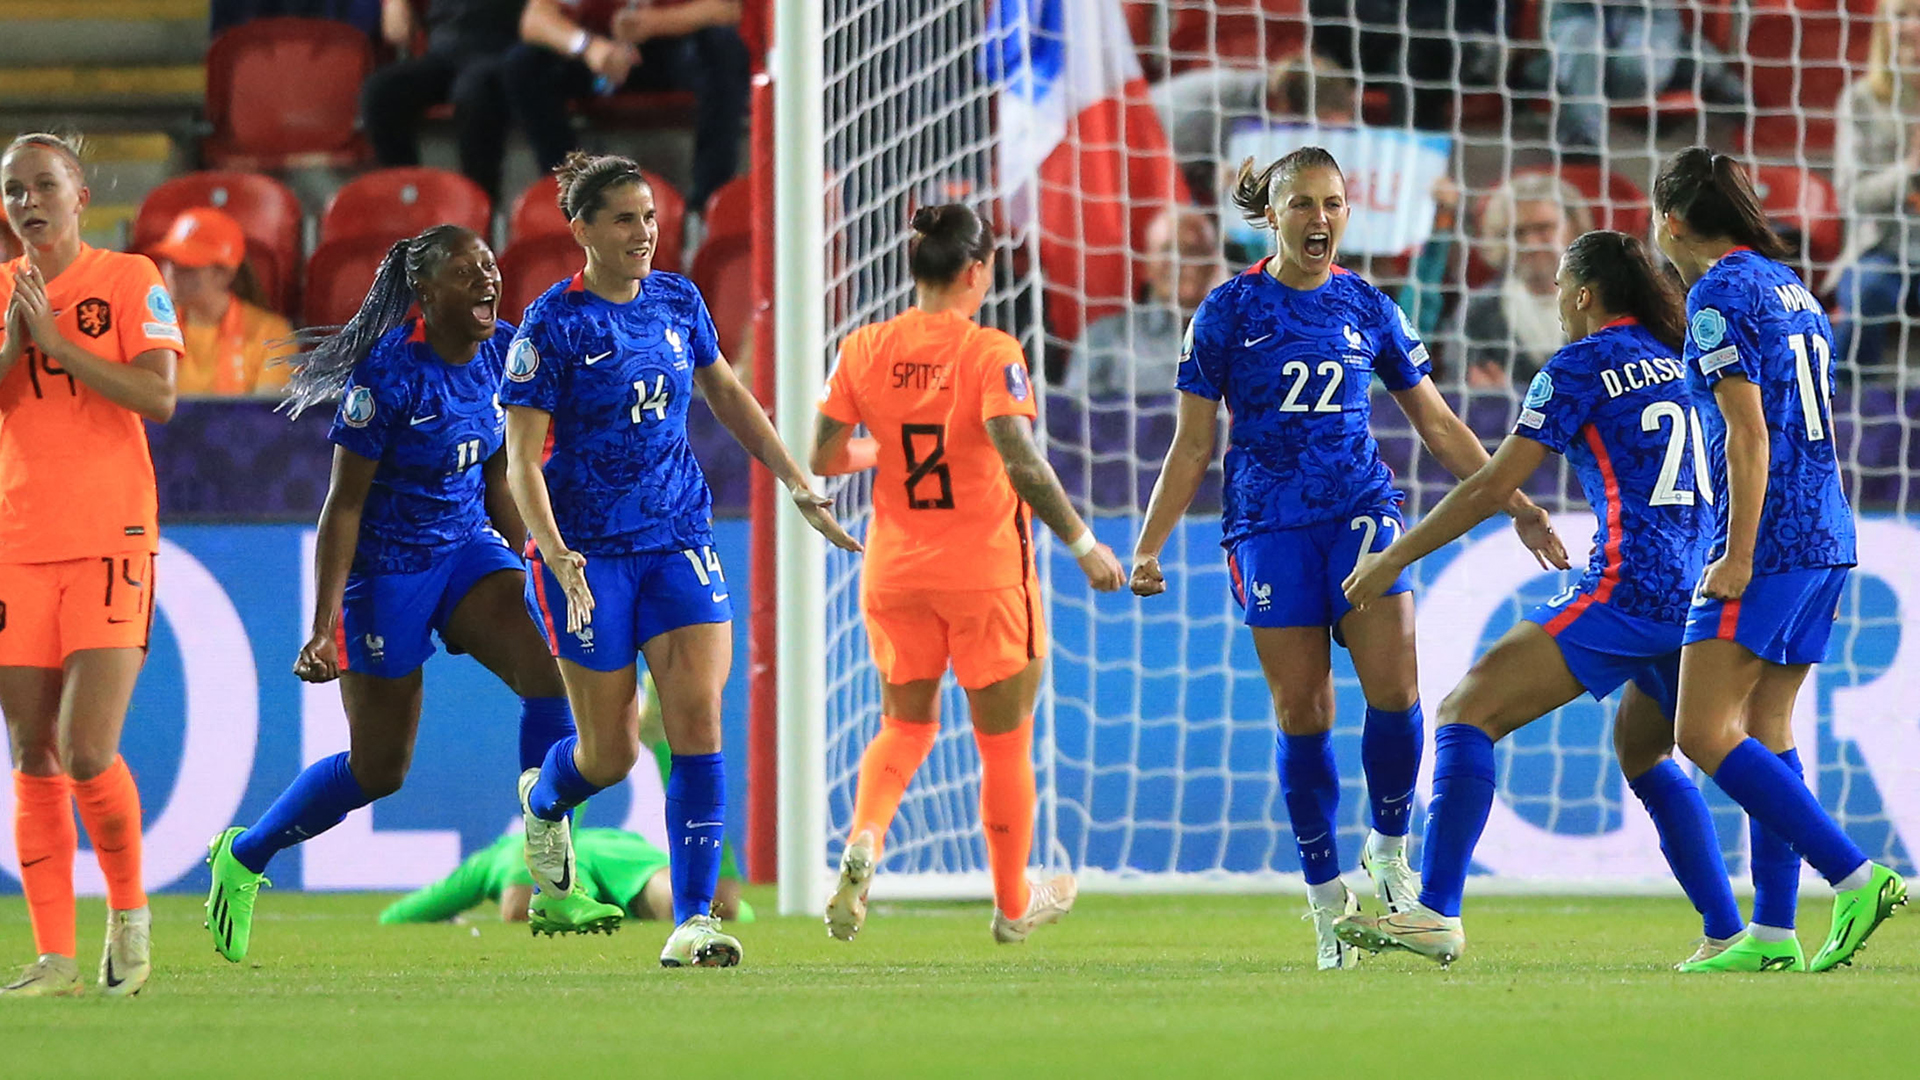 France's defender Eve Perisset (3R) celebrates her goal with teammates during the UEFA Women's Euro 2022 quarter final football match between France and Netherlands at the New York Stadium, in Rotherham, on July 23, 2022.